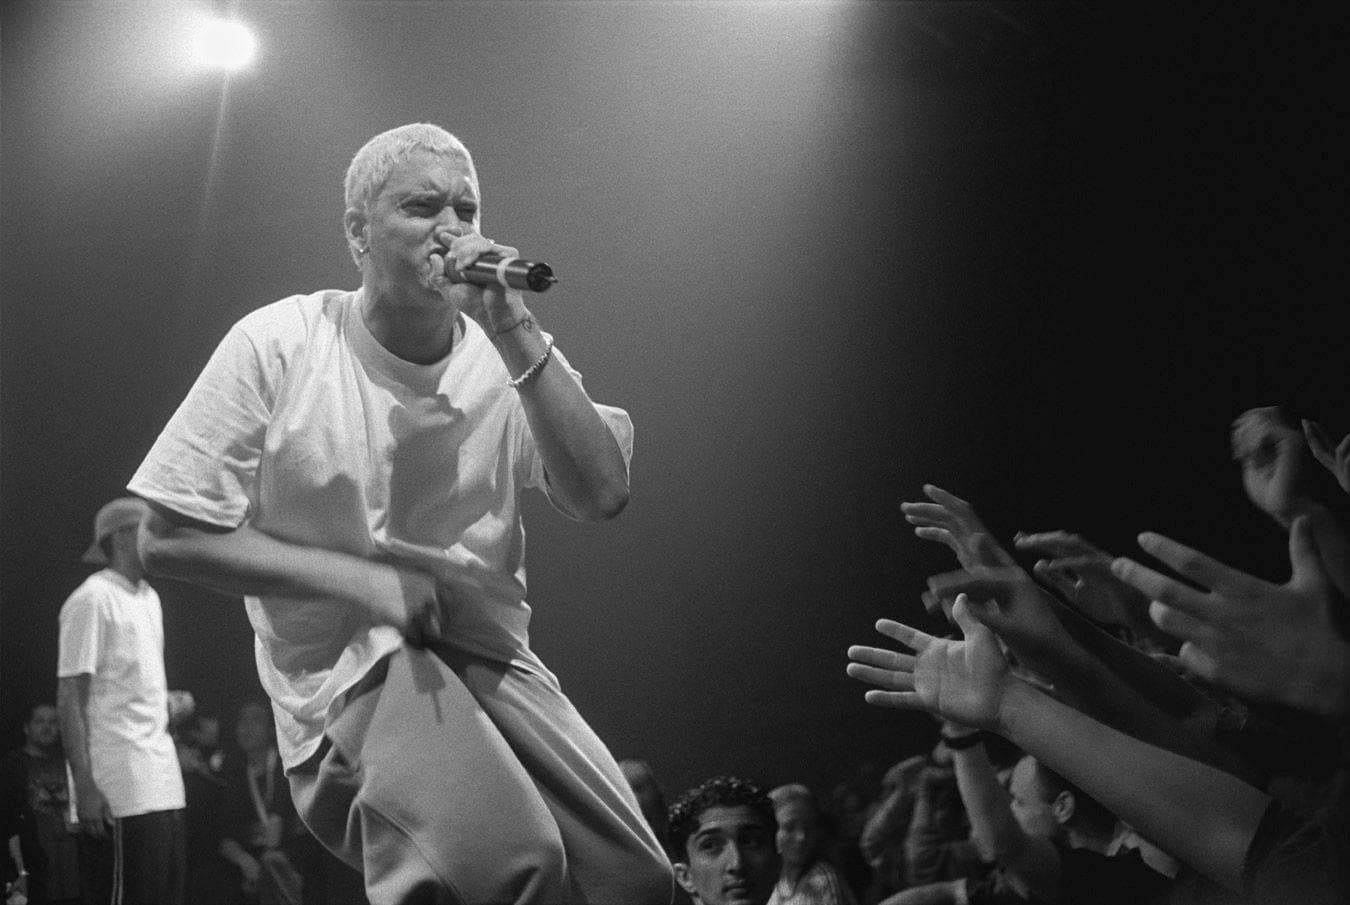 Random Fascinating Facts You Didn't Already Know About Eminem